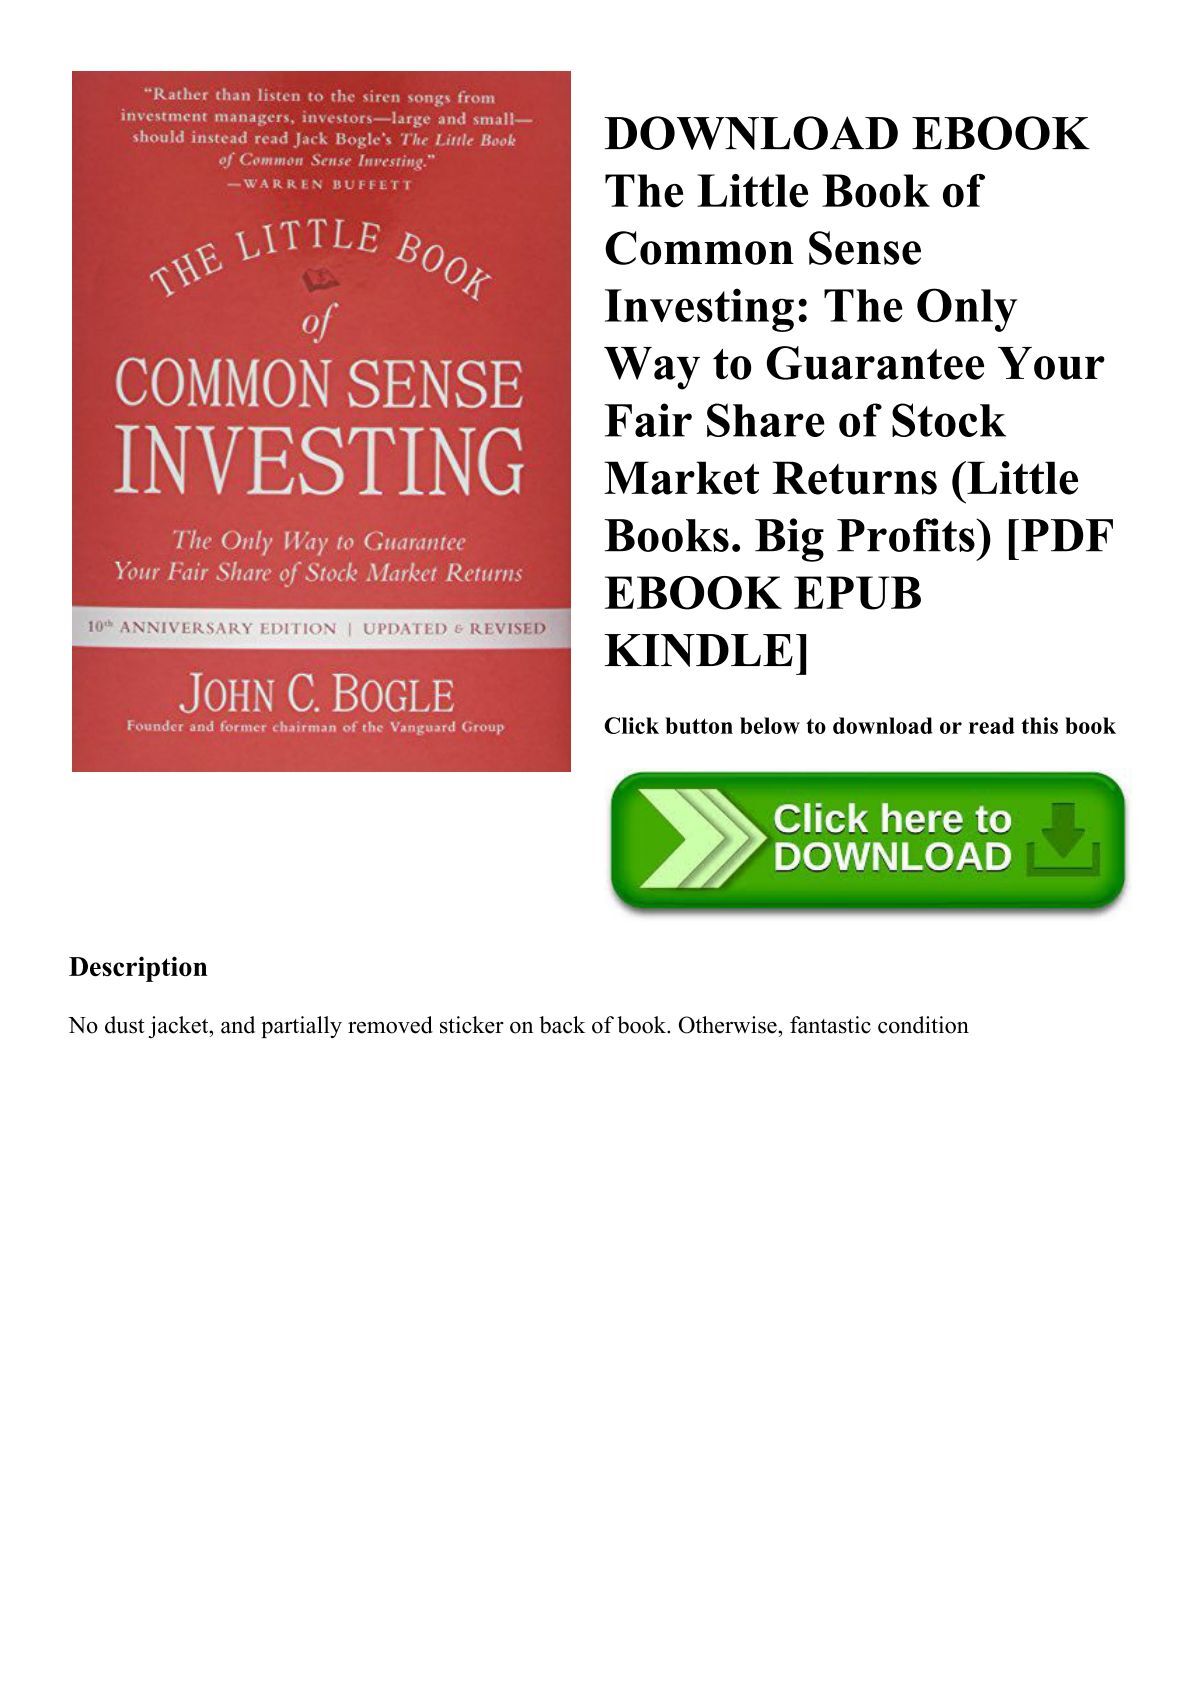 The Little Book of Common Sense Investing: The Only Way to Guarantee Your  Fair Share of Stock Market Returns (Little Books, Big Profits)